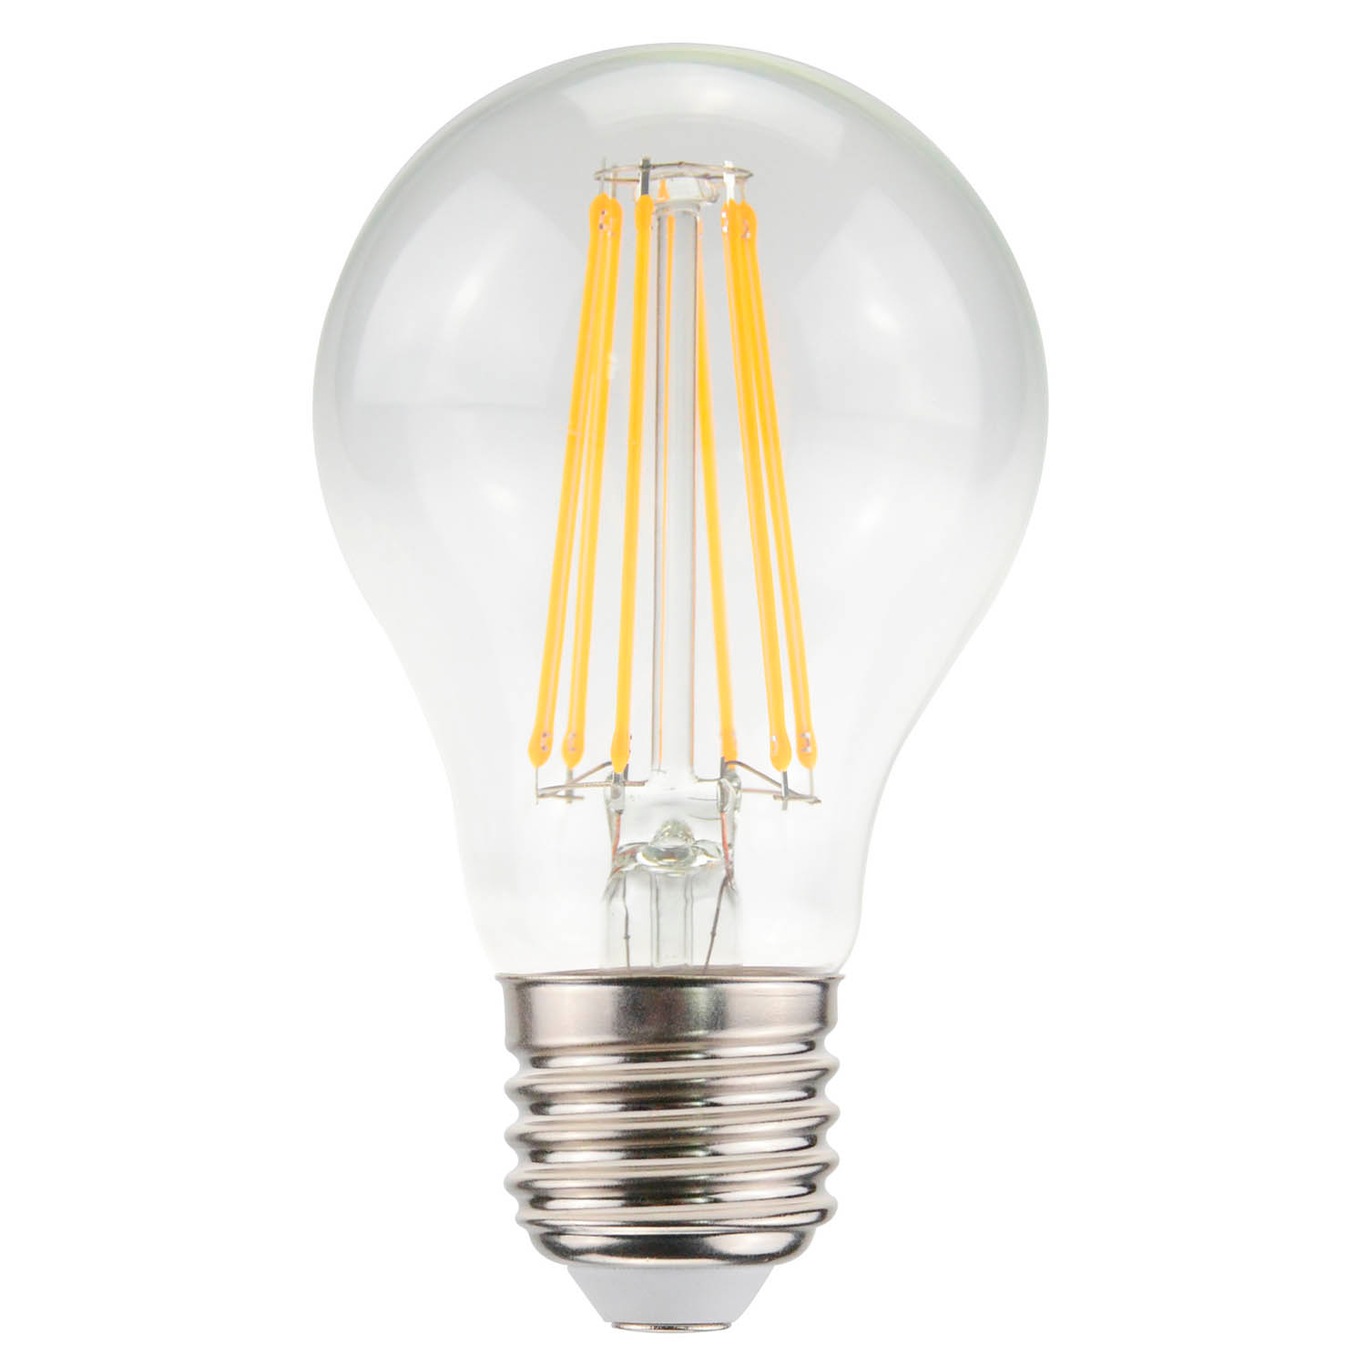 Filament LED E27 2700K 806lm 7W Dimmable